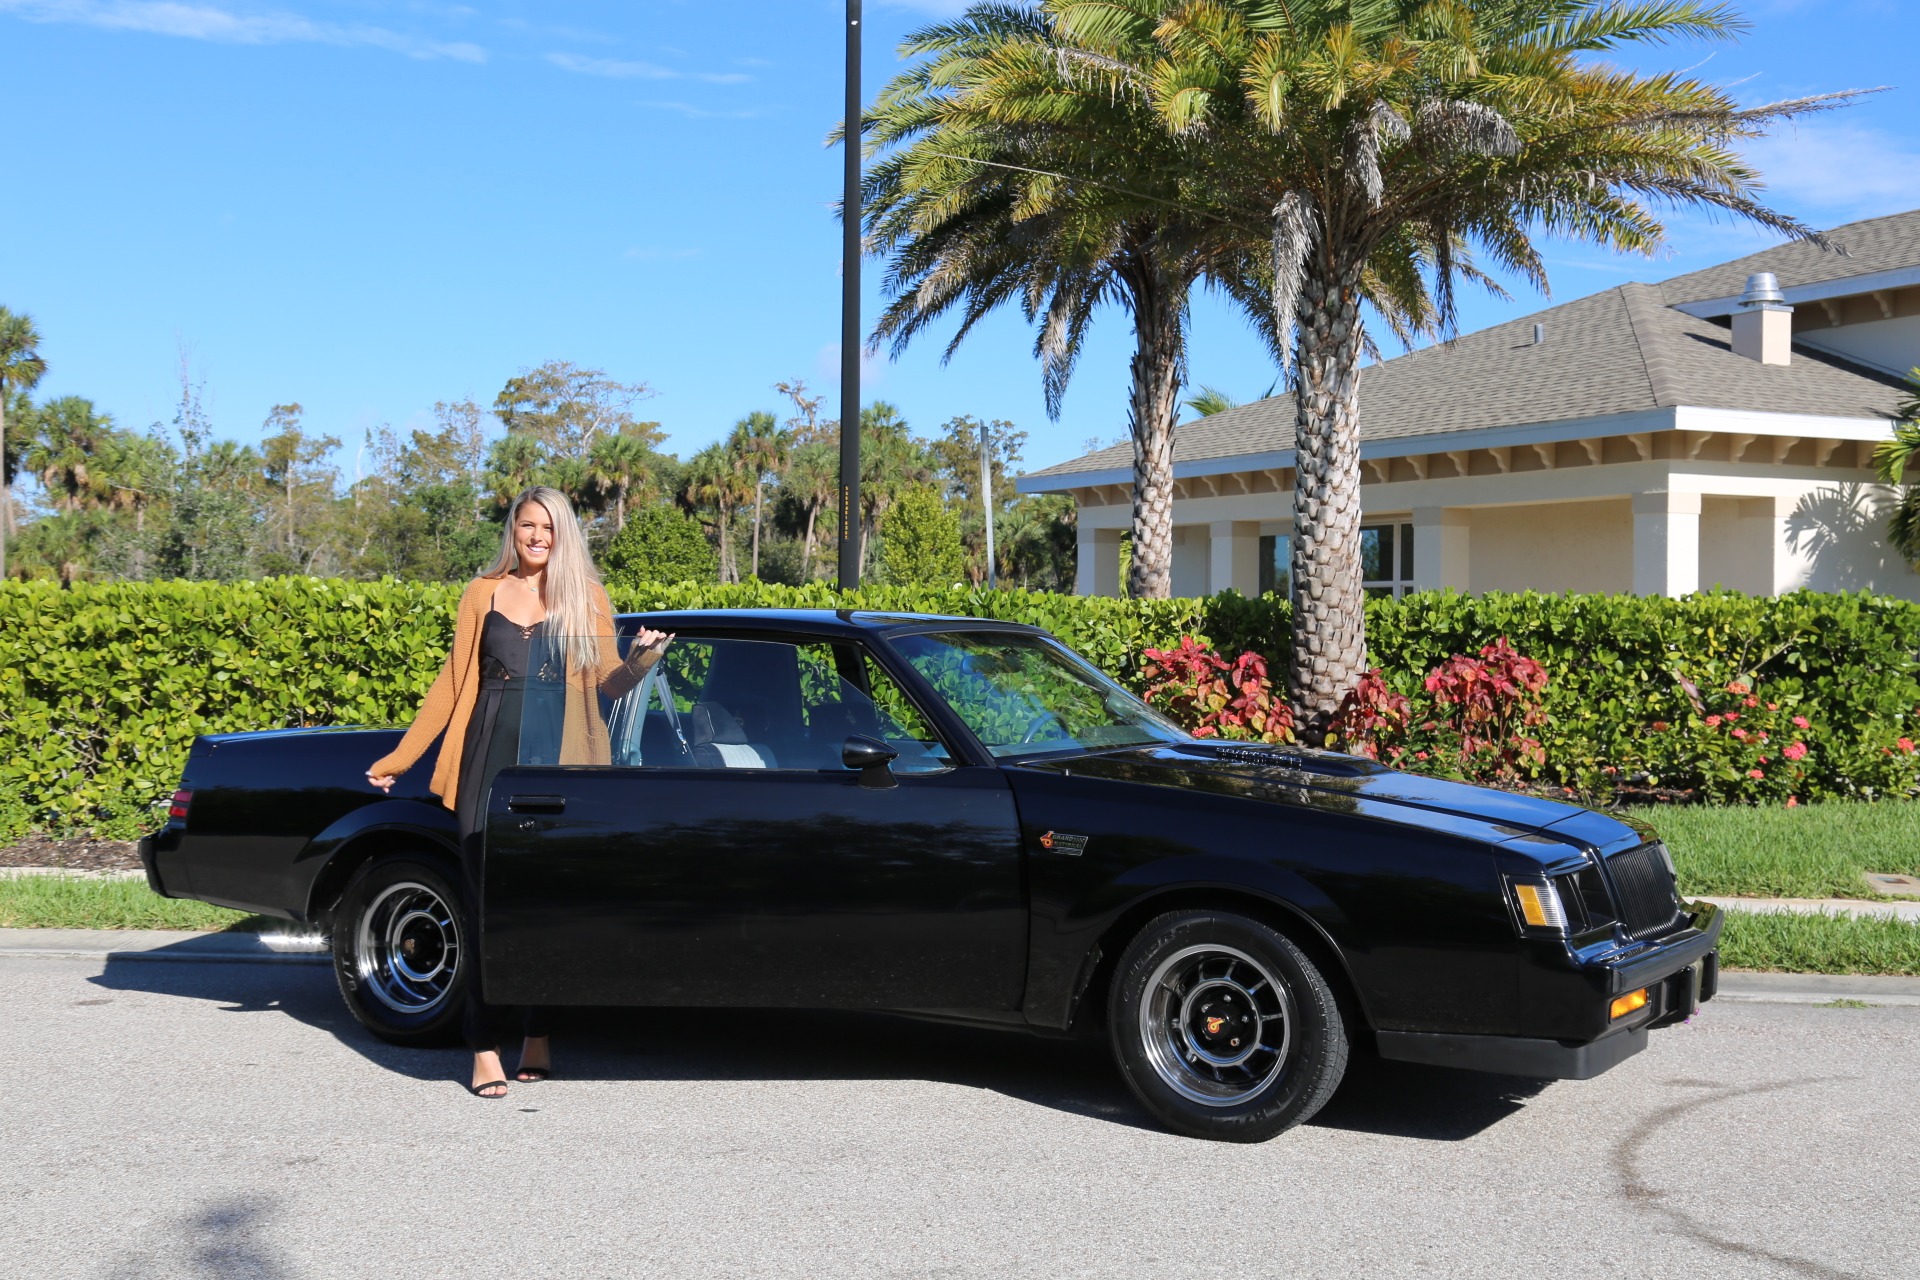 Used 1987 Buick Grand National Turbo Grand National Turbo for sale Sold at Muscle Cars for Sale Inc. in Fort Myers FL 33912 2